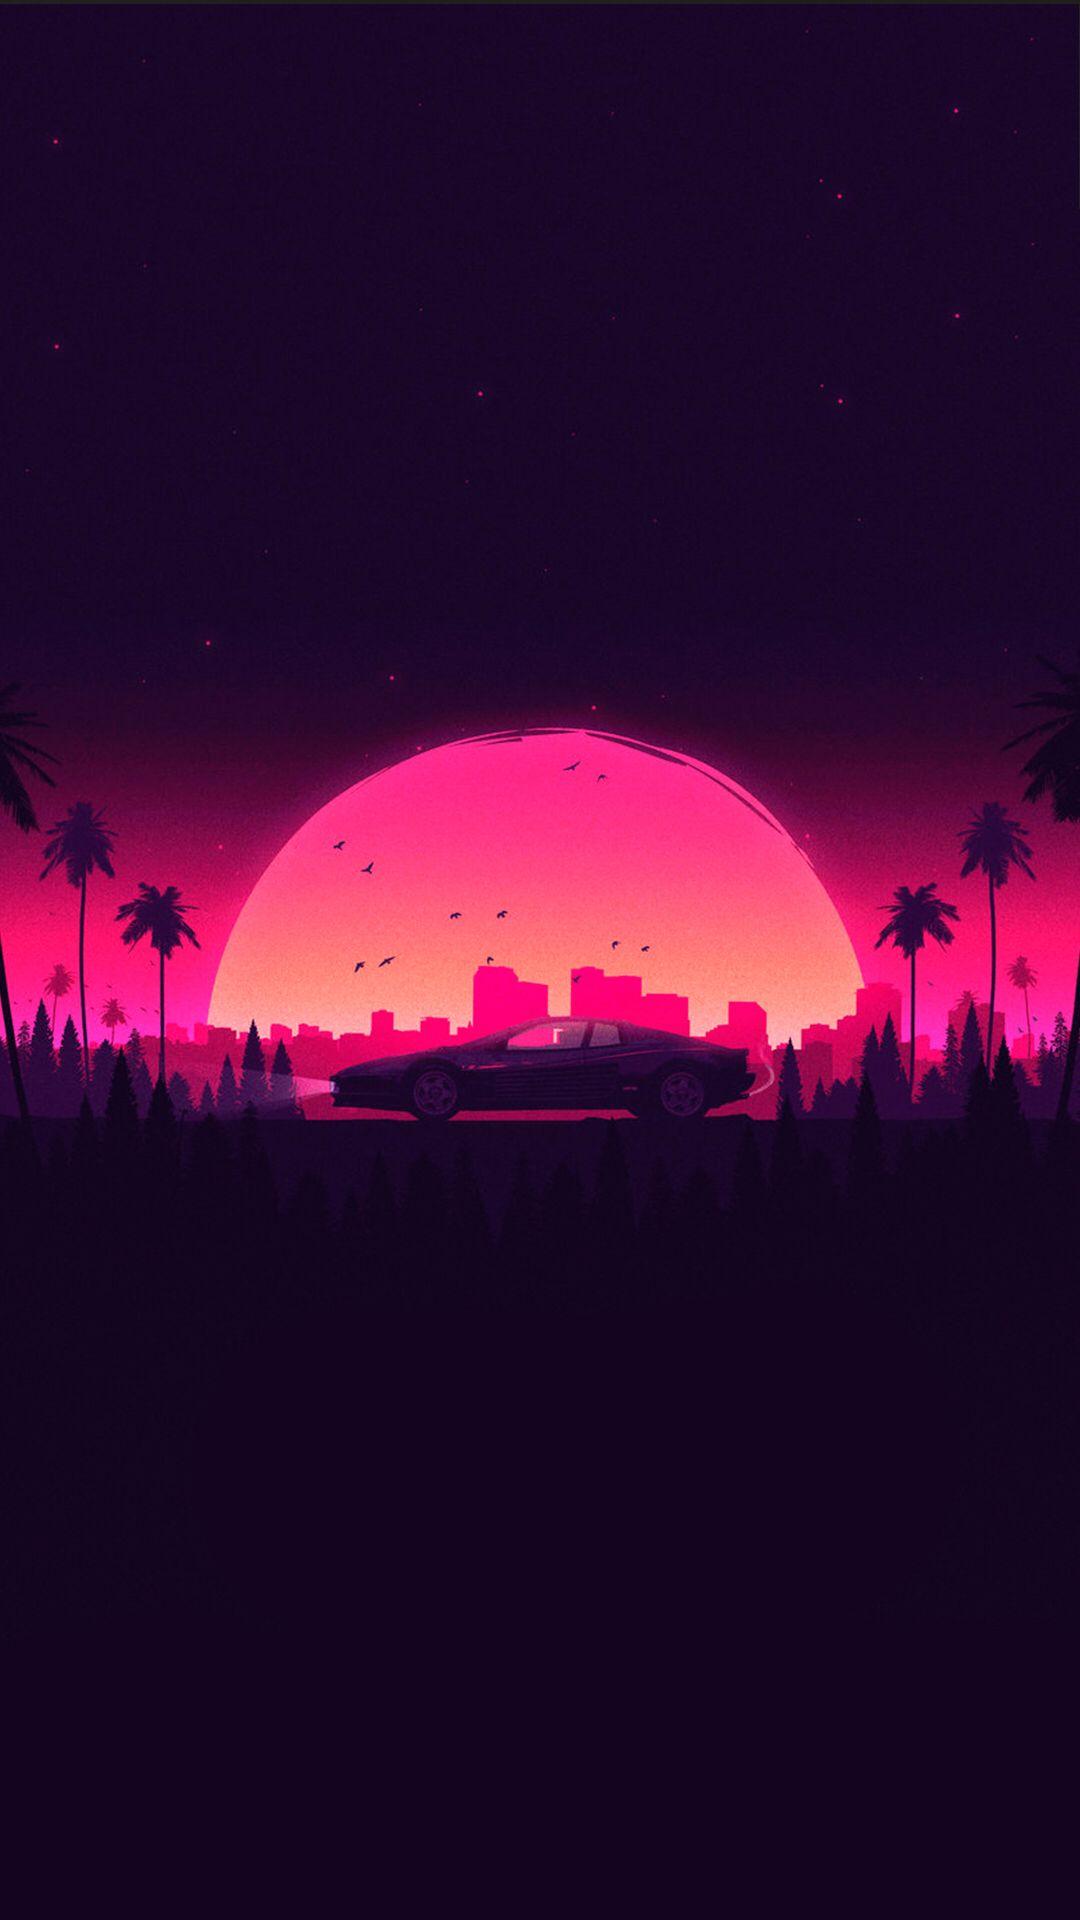 Car, palm trees and city in front of a pink sunset